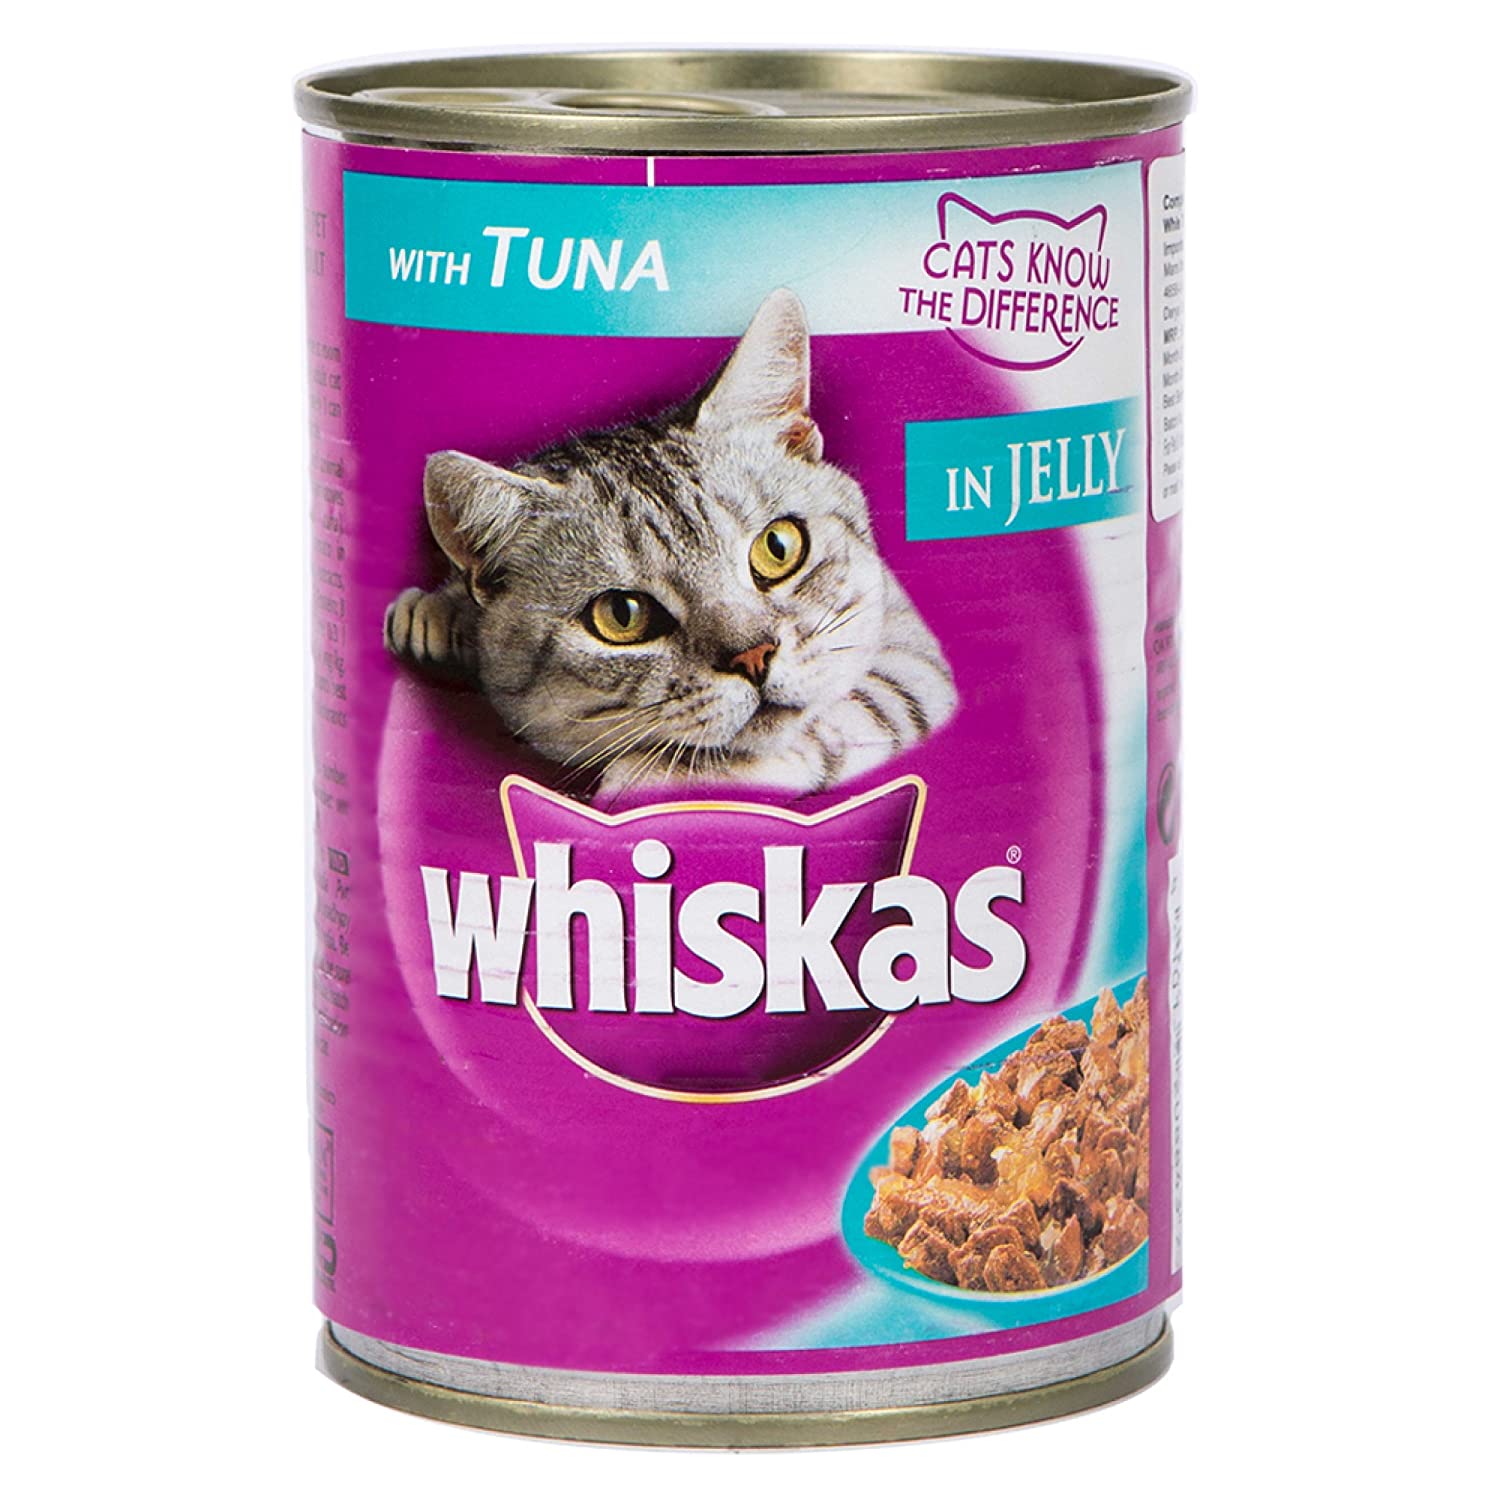 Whiskas Adult (+1 year) Wet Cat Food, Tuna in Jelly, 400g Can: Amazon ...